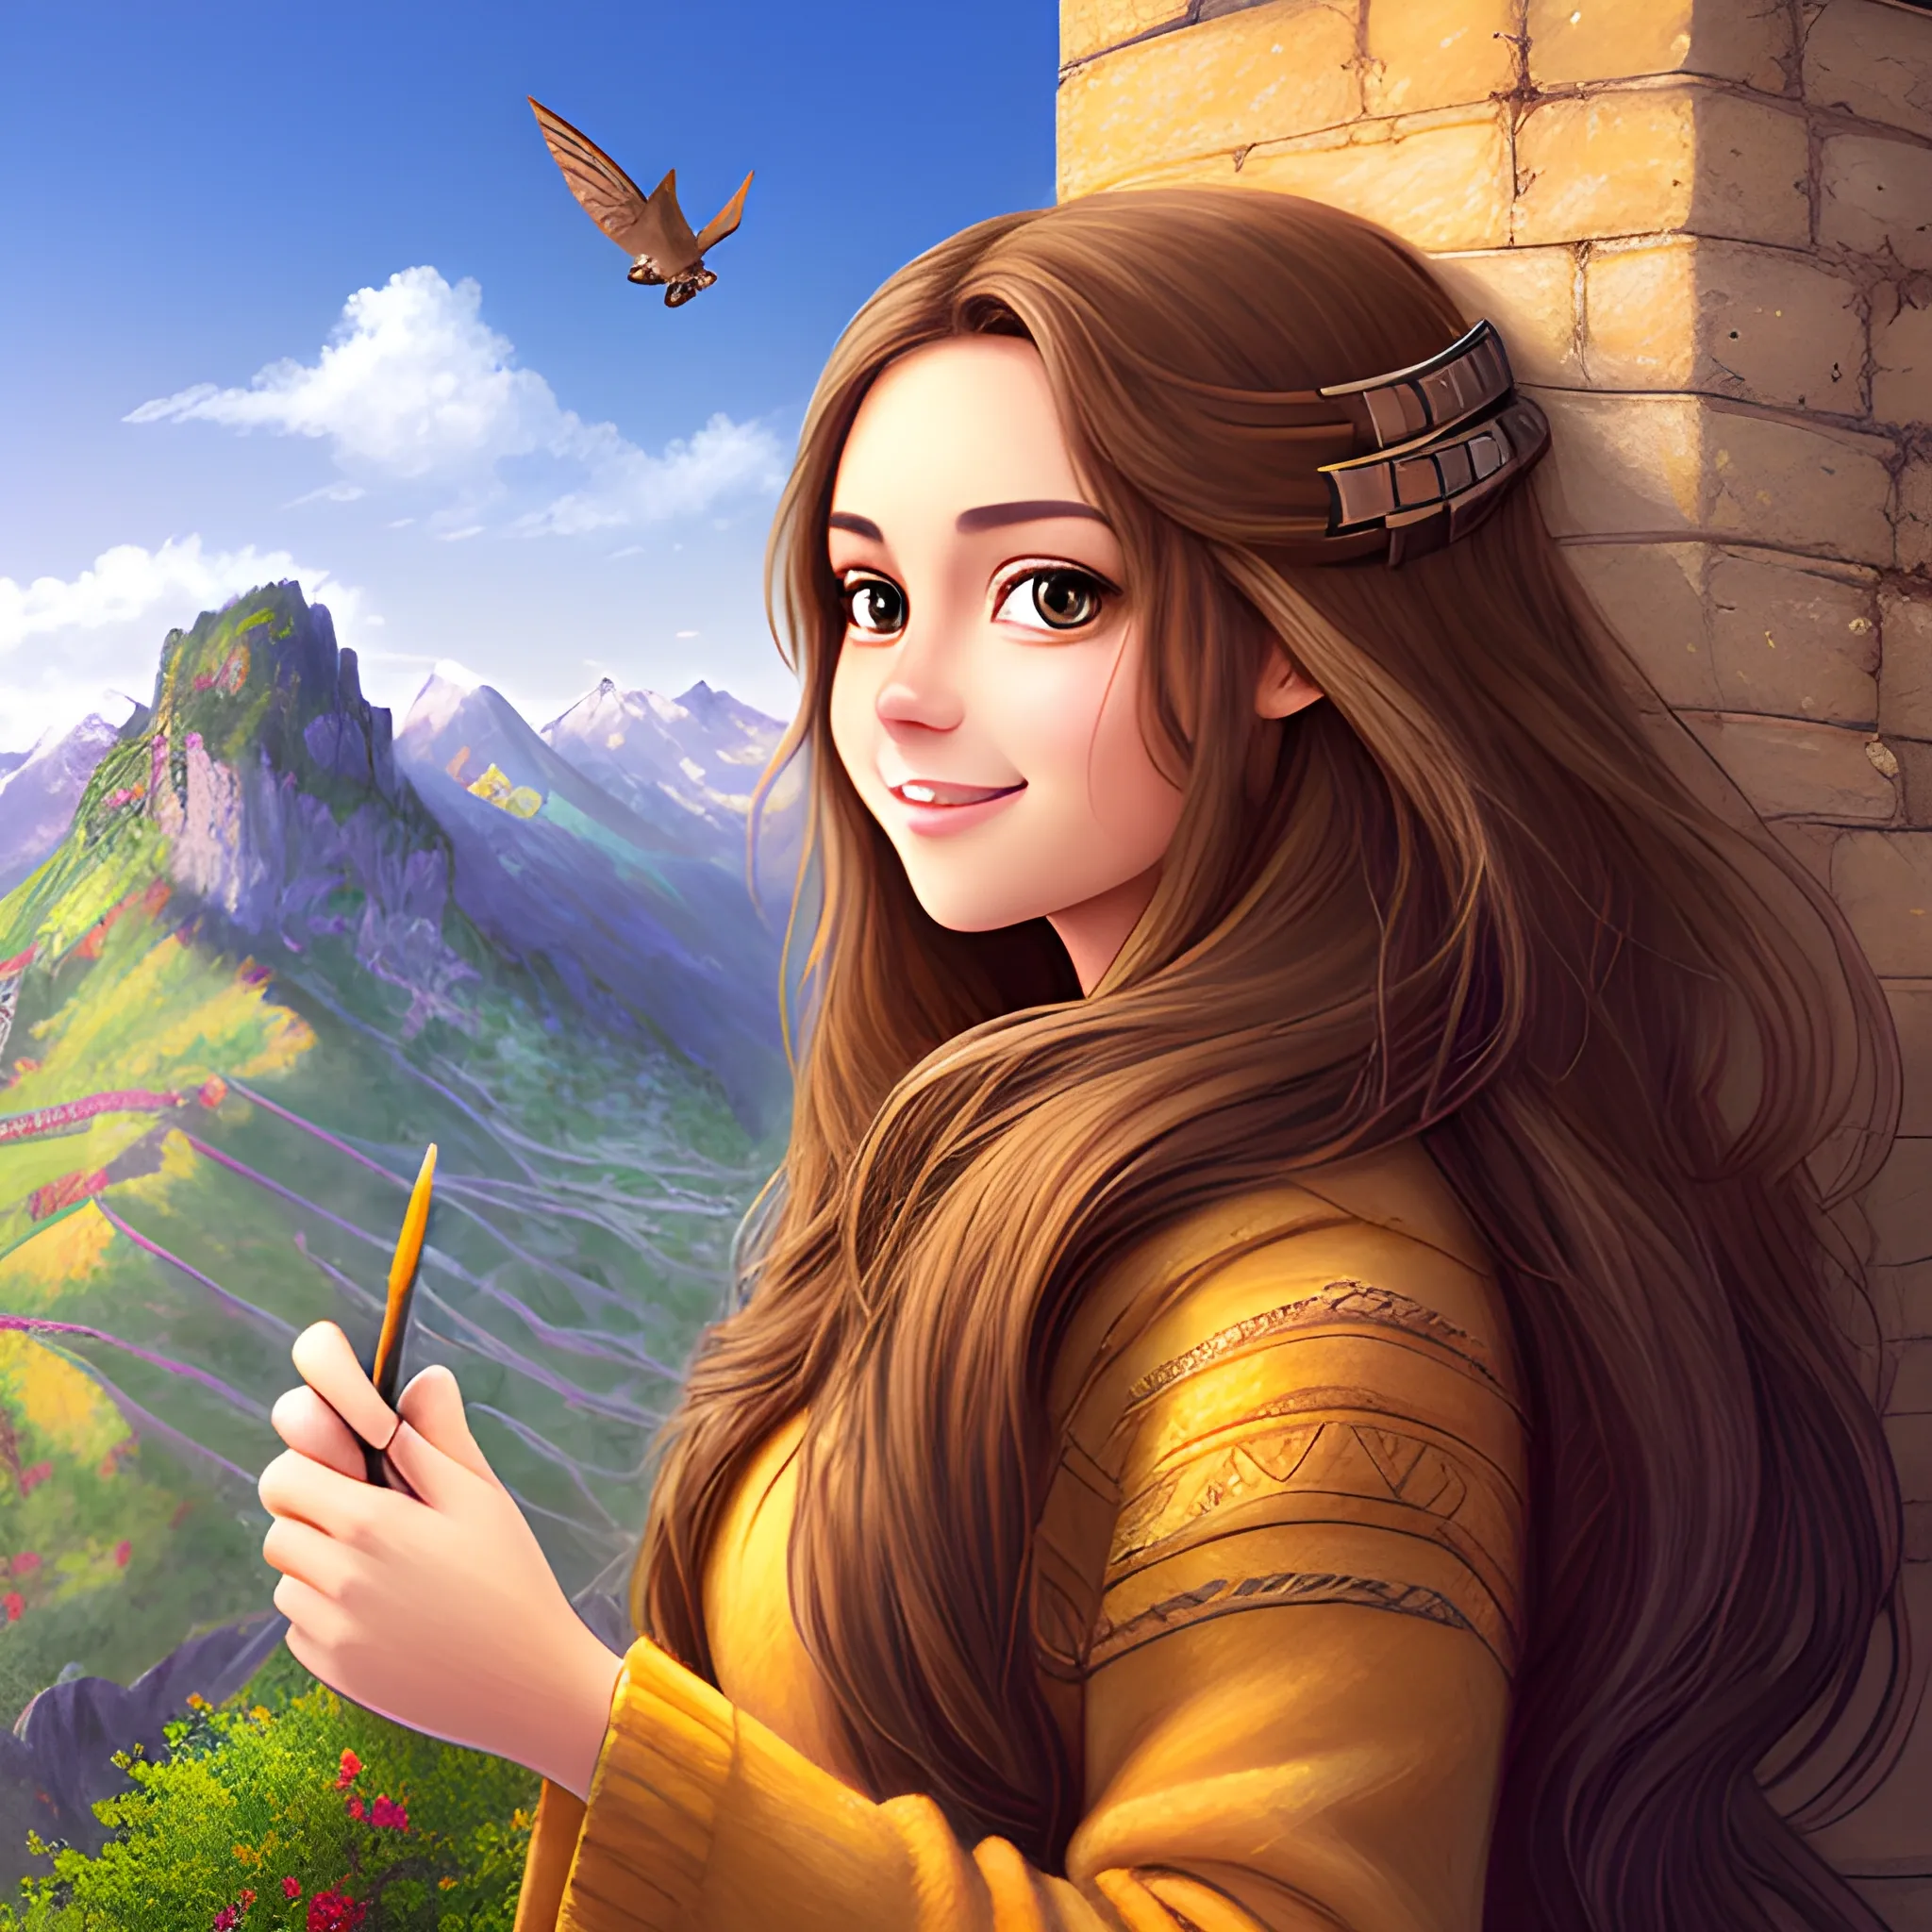 draw a cheerful beautiful woman with long brown hair and big brown eyes, diverse and colorful mountain and fortress, high depth of field, soft lighting, with falcon on hand